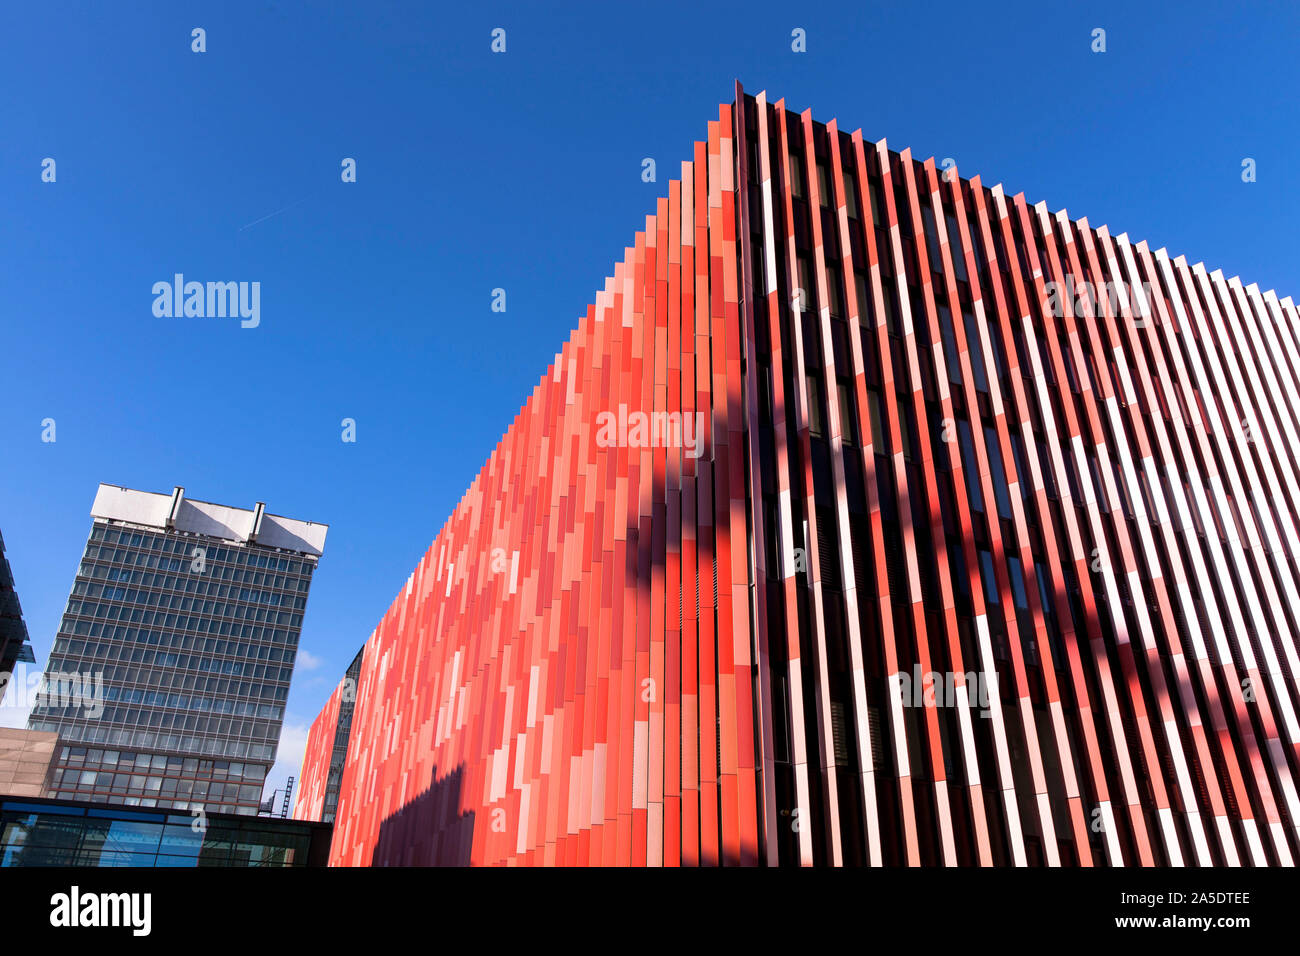 University Hospital, the Bettenhaus (bed house) in the background and the Center for Integrated Oncology, Cologne, Germany.  Universitaetsklinikum, im Stock Photo